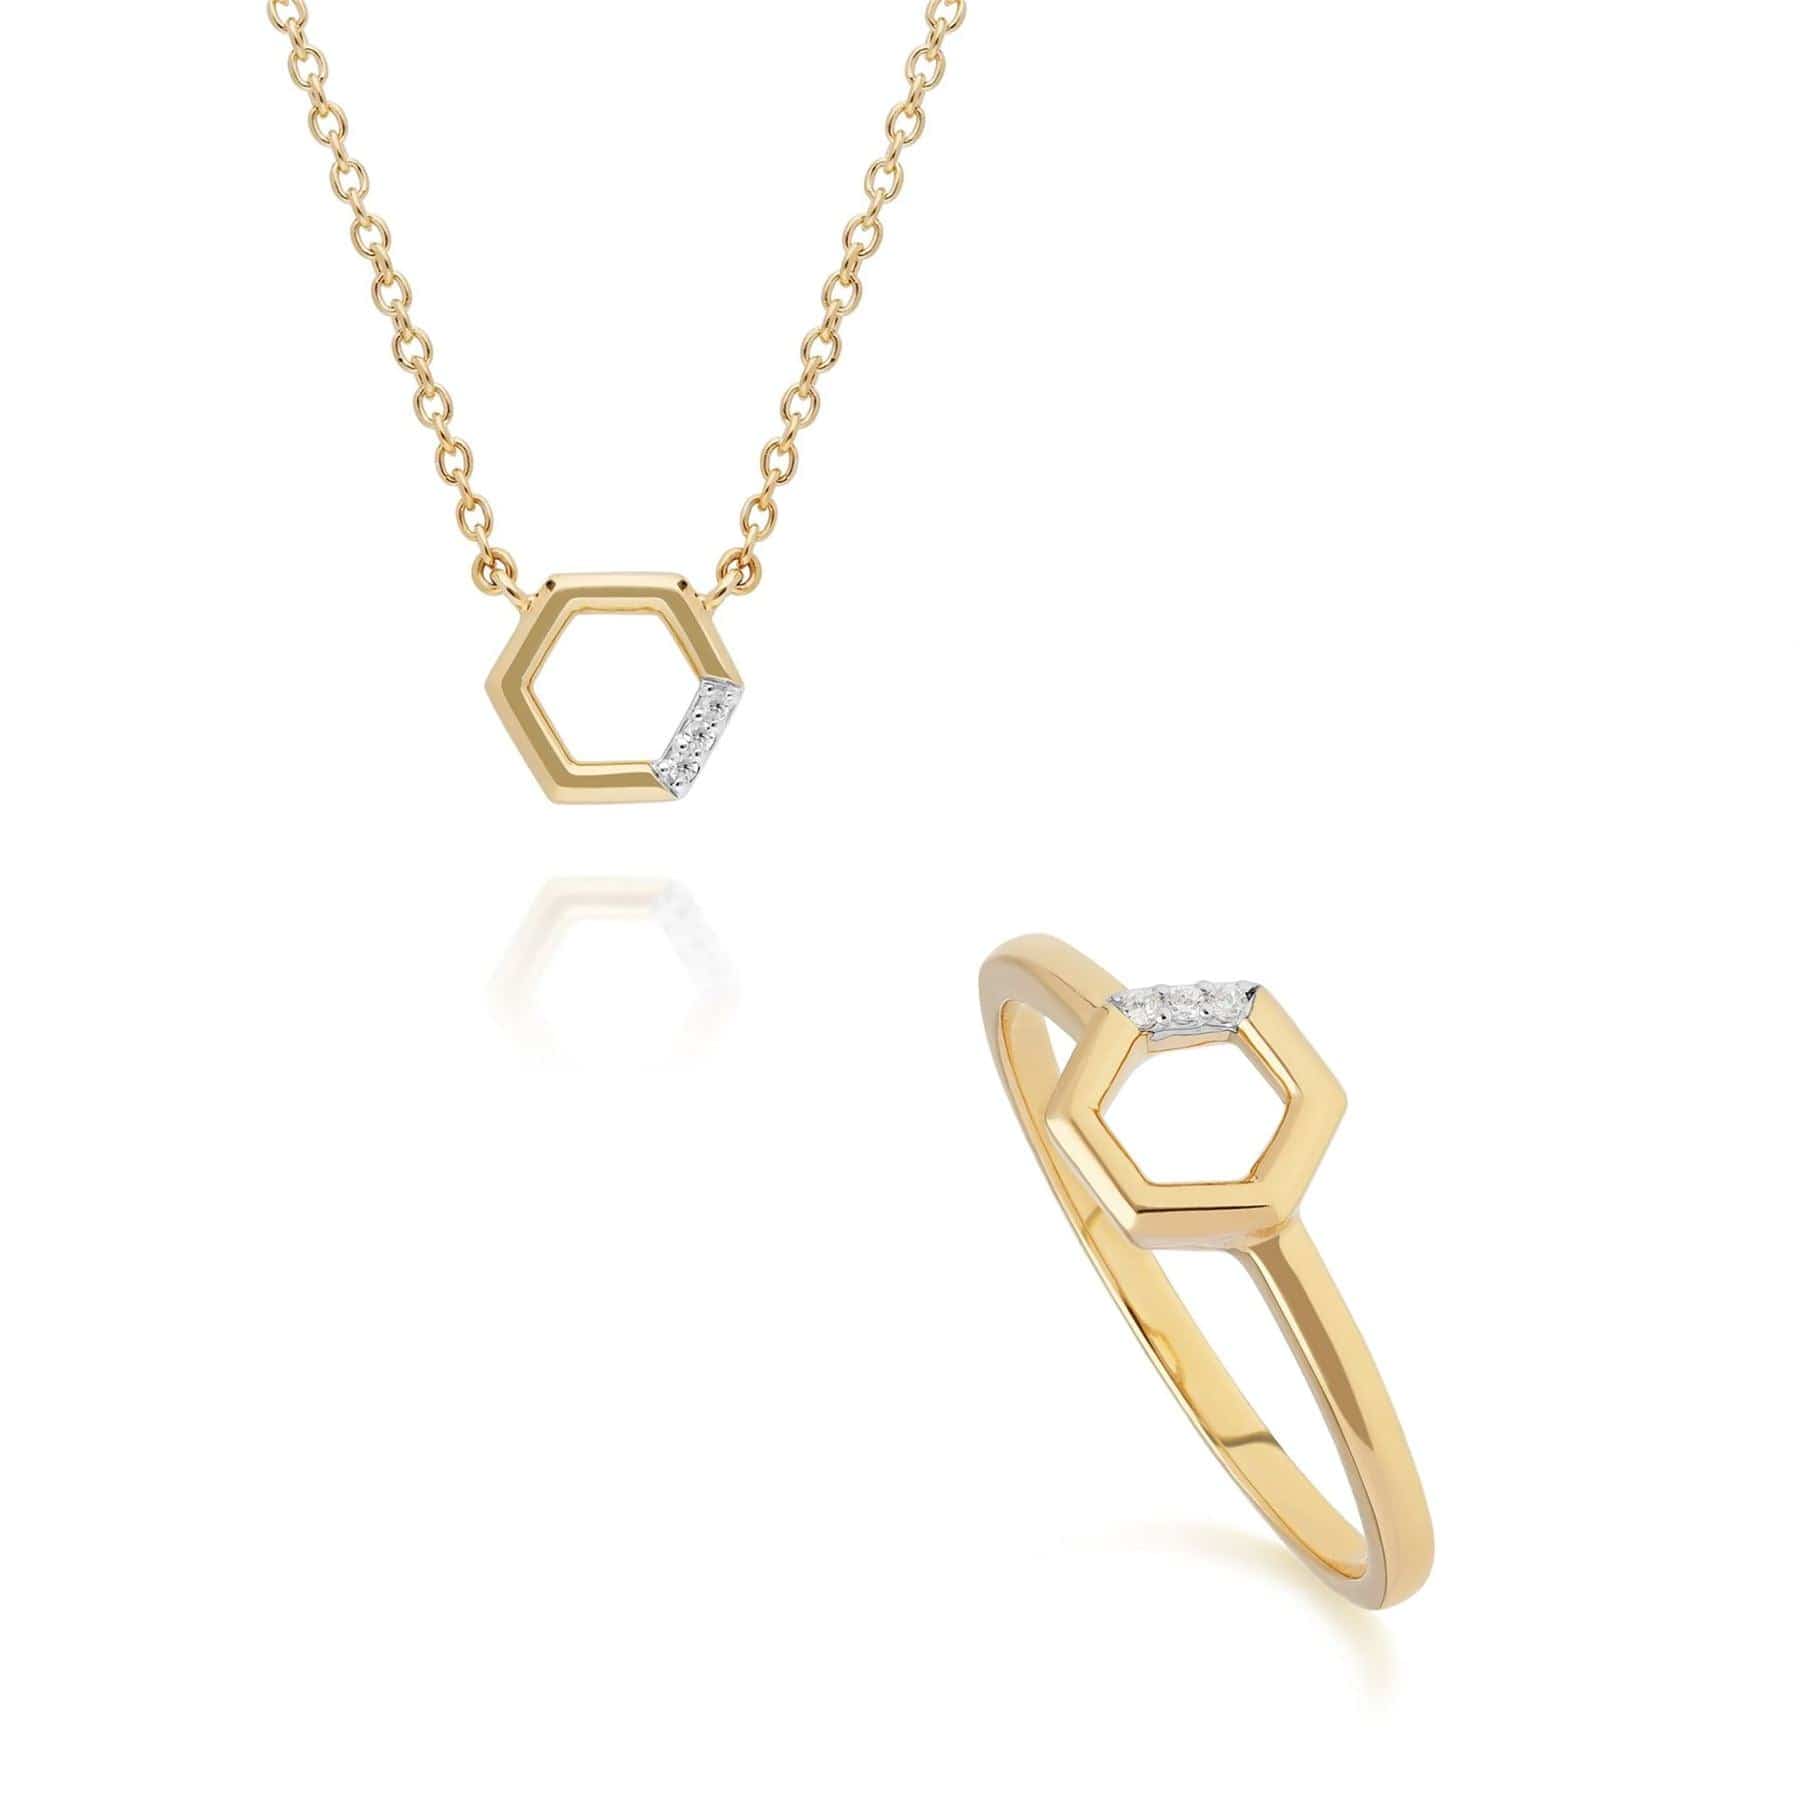 Diamond Pave Hexagon Necklace & Ring Set in 9ct Yellow Gold